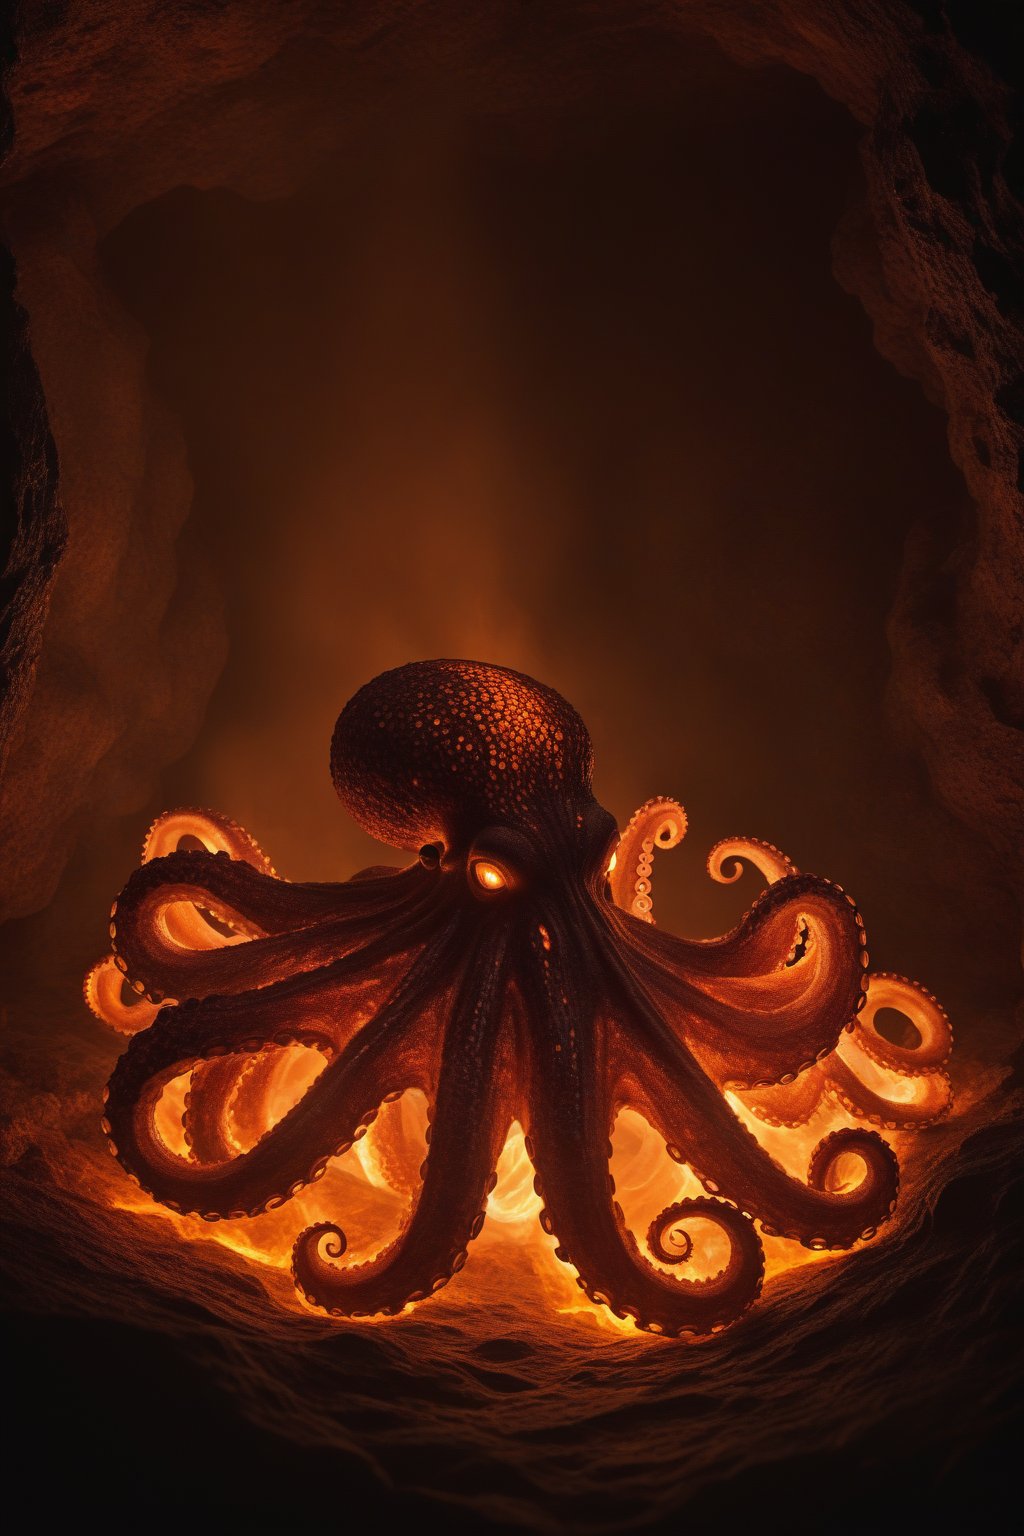 octopus entirely made from fire and lava, fire elemental, magical, cavern, dark, mystical, Cinematic lighting, Textured and detailed cavern floor and walls